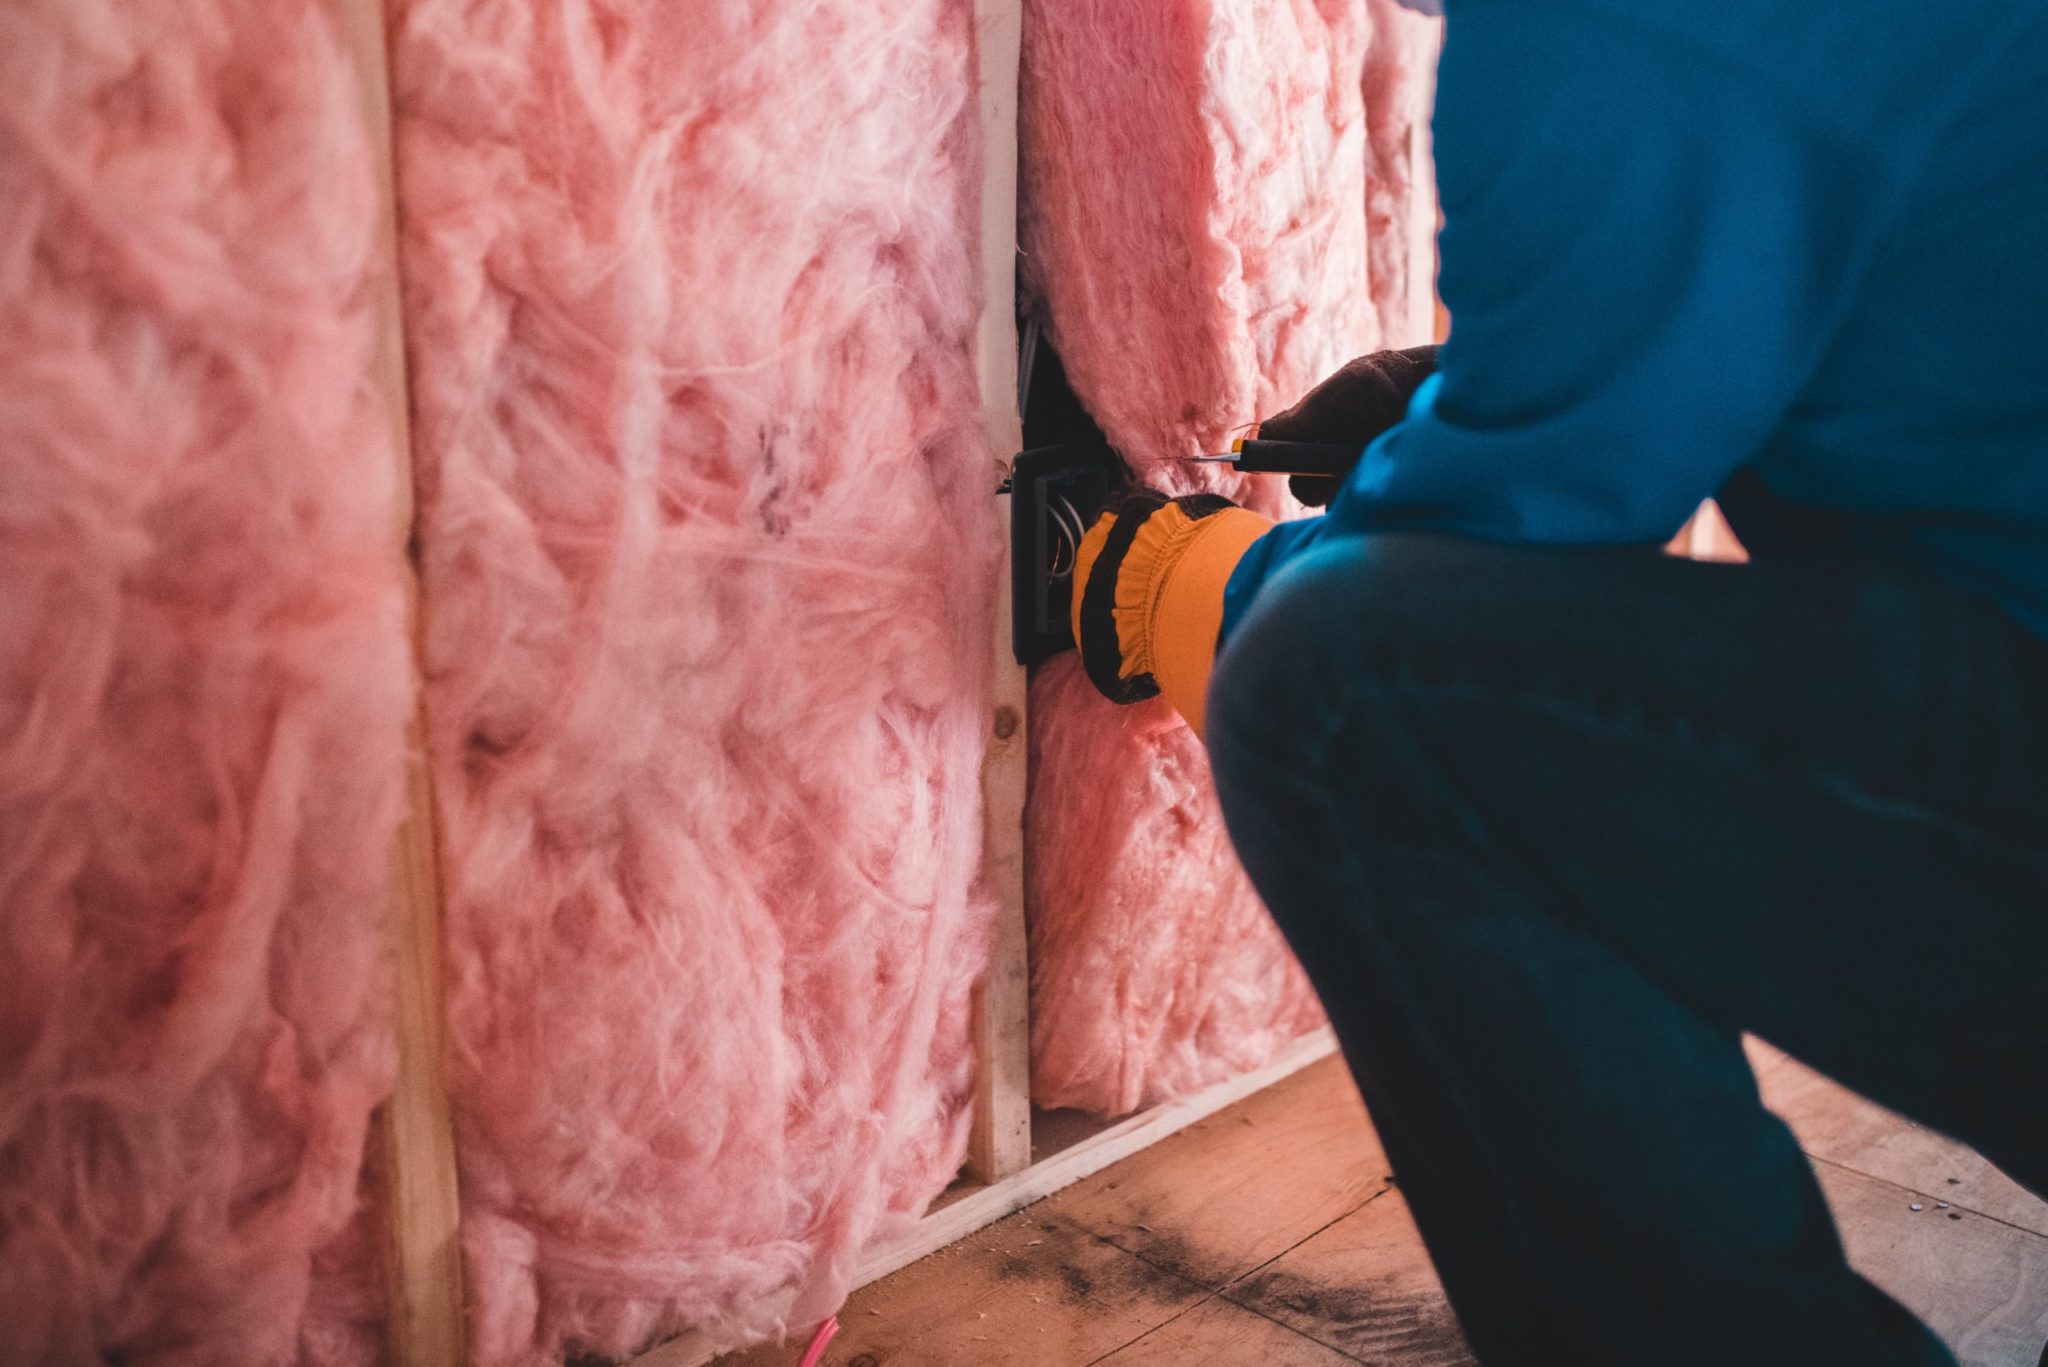 Hank Zarihs Associates | Future MPs urged to think big to avoid more botched insulation work